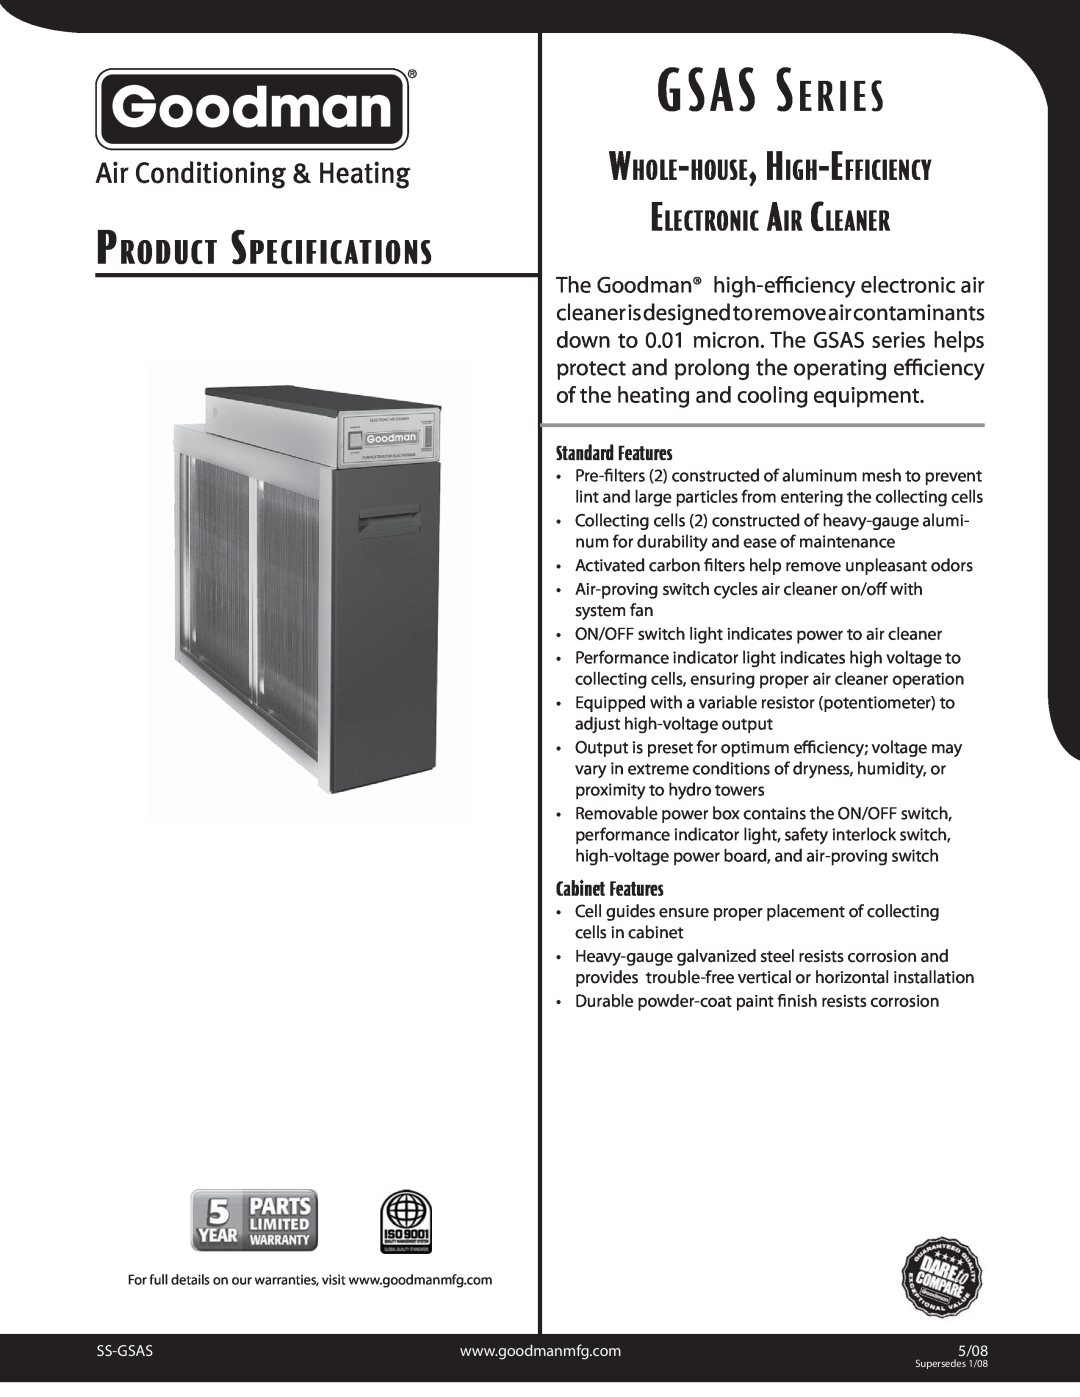 Goodman Mfg GSAS Series specifications Gsas Se R I E S, Product Specifications, Electronic Air Cleaner, Standard Features 